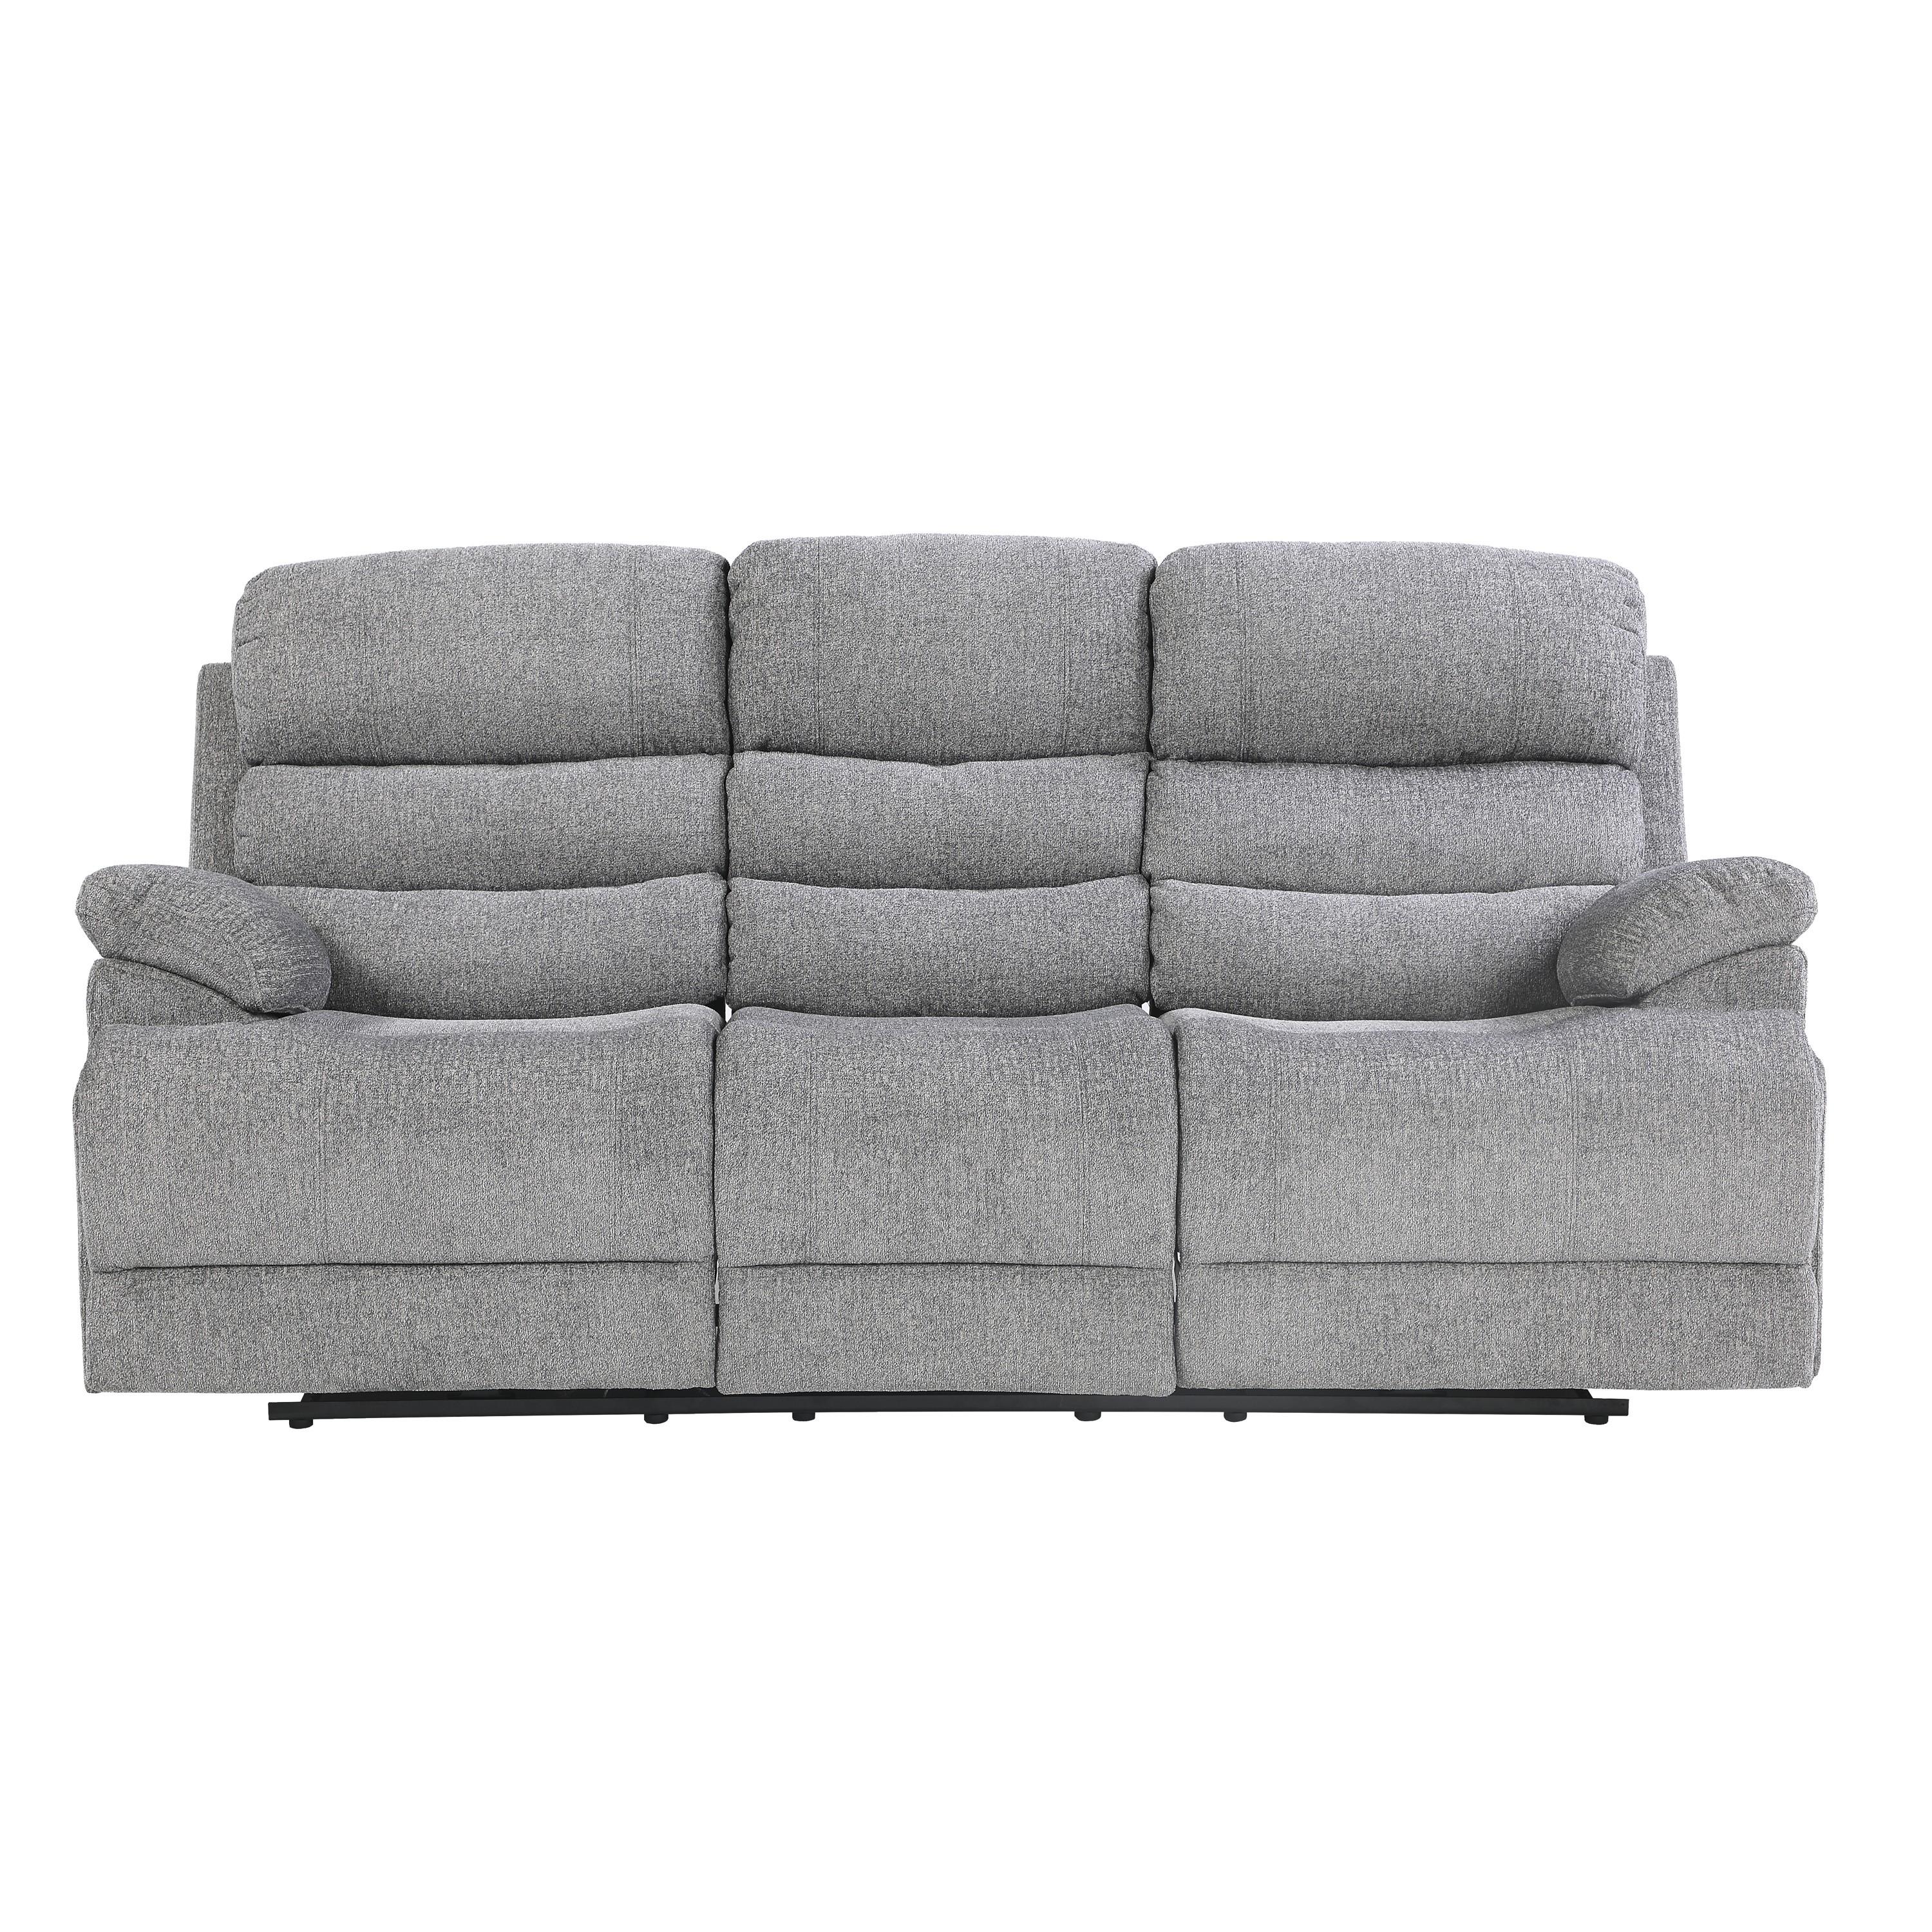 Transitional Reclining Sofa 9422FS-3 Sherbrook 9422FS-3 in Gray Chenille